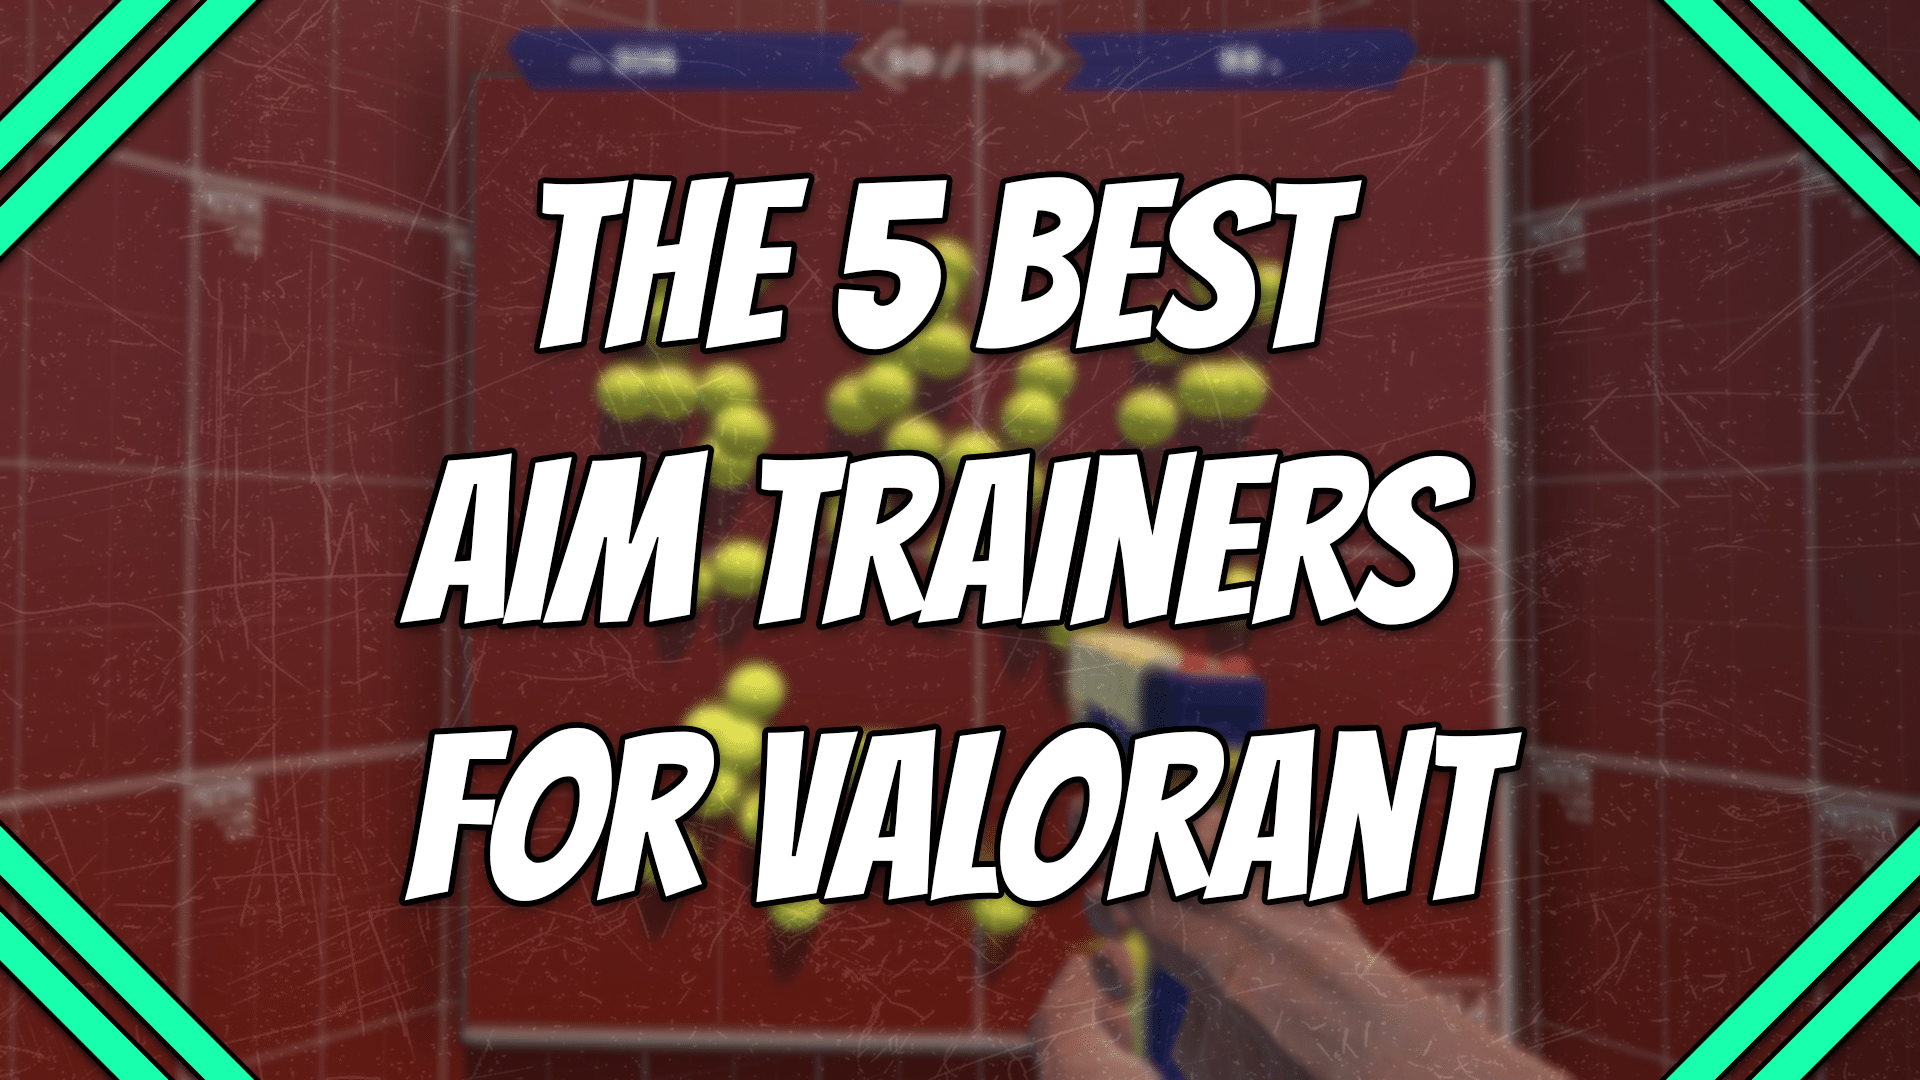 The 5 Best Aim Trainers for Valorant title card.